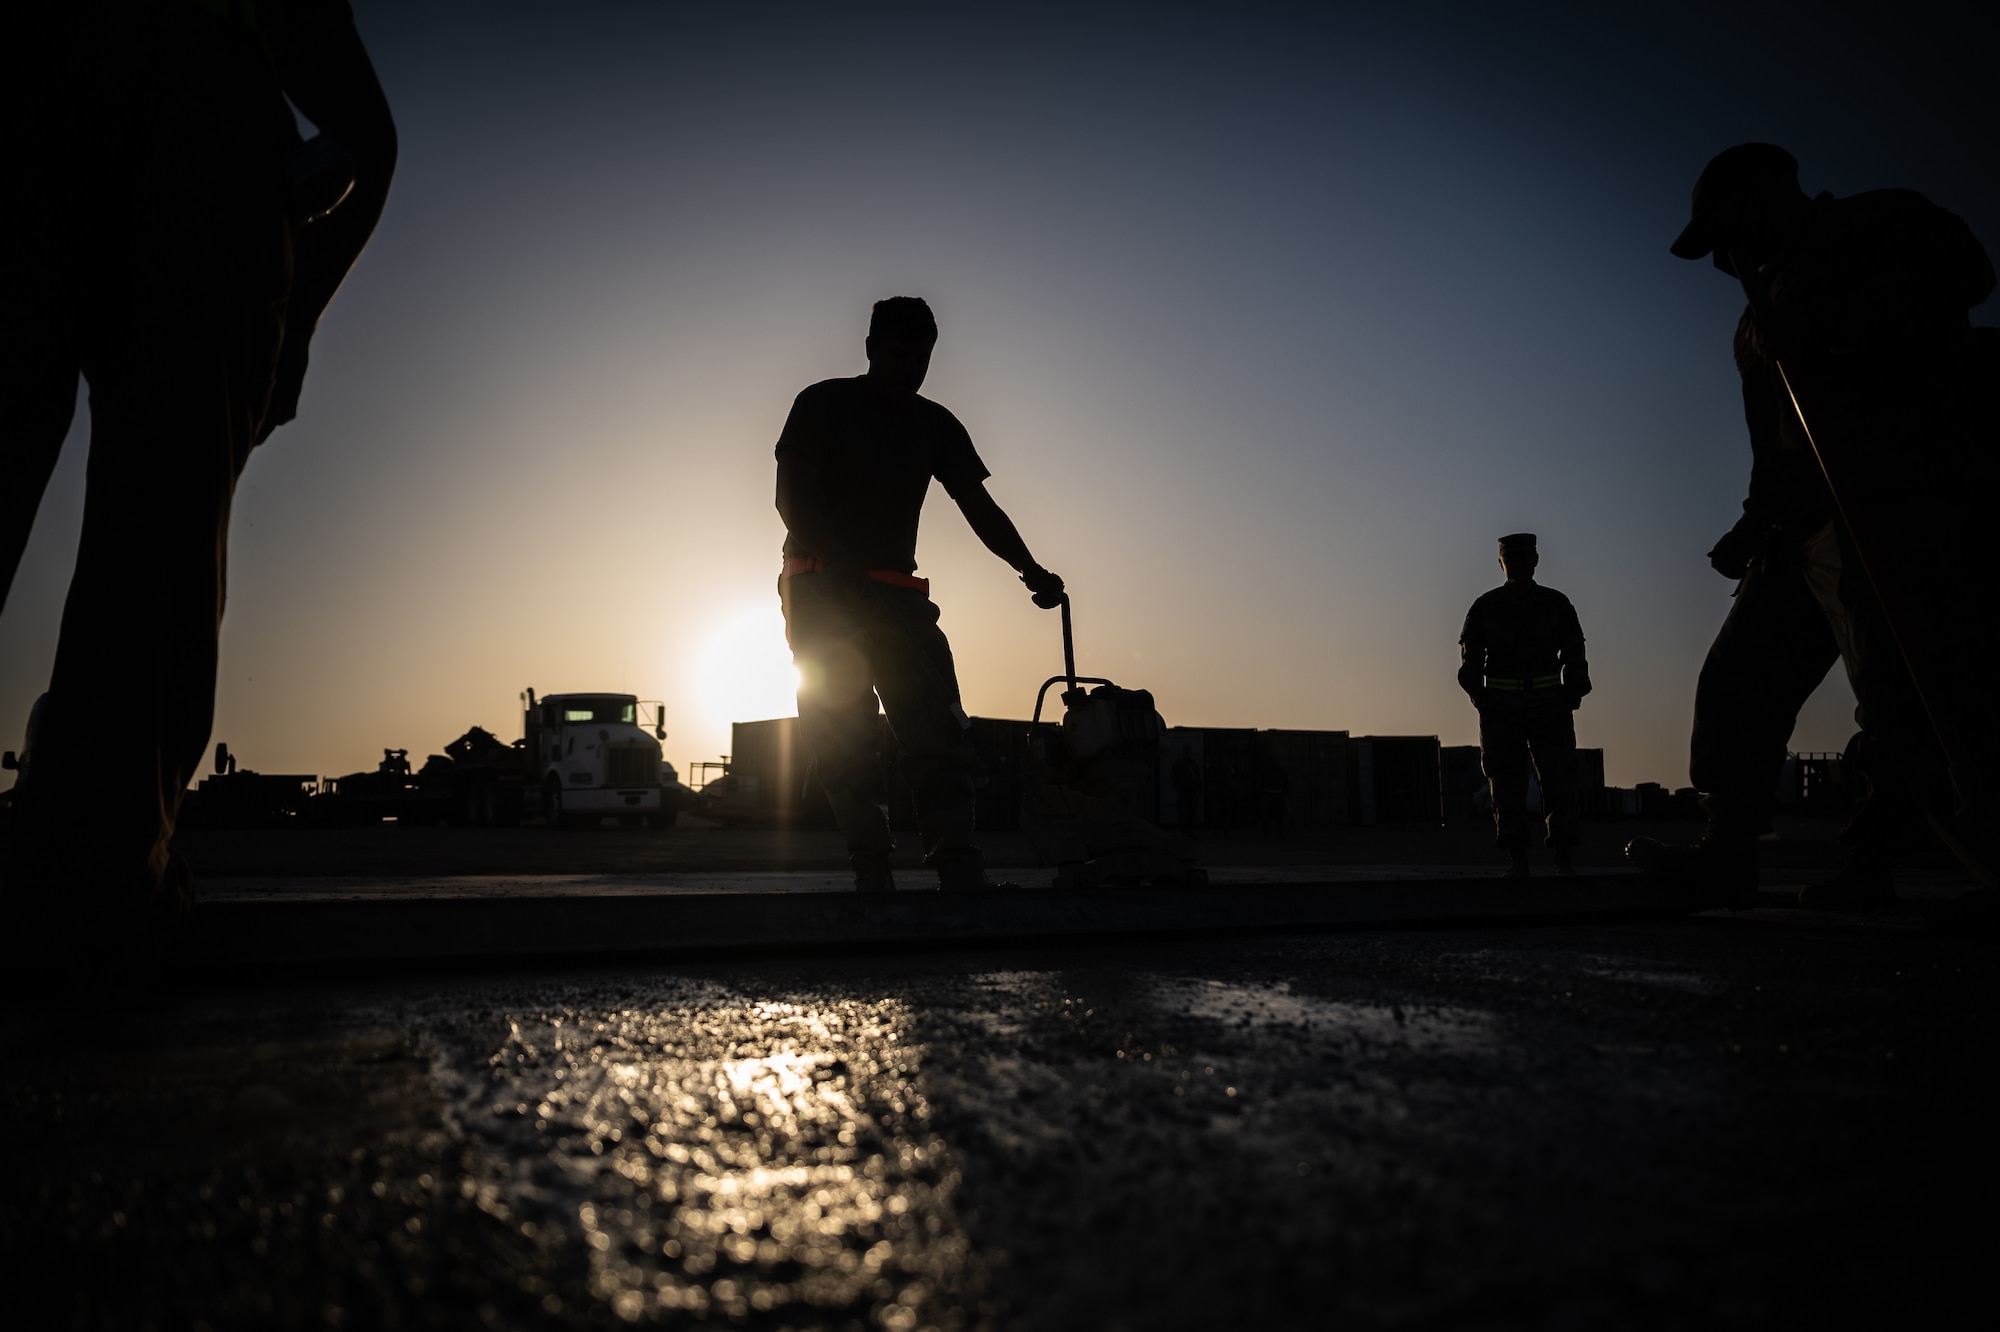 Senior Airman Alexander Curtiss, 332d Expeditionary Civil Engineer Squadron structural specialist journeyman, uses a power concrete screed to confirm a level surface during a rapid airfield damage recovery exercise at an undisclosed location in Southwest Asia, May 12, 2022. RADR exercises test the ability of the 332d ECES to rapidly repair runways and runway support structures to recover and resume airfield operations after it has experienced significant damage. (U.S. Air Force photo by Master Sgt. Christopher Parr)